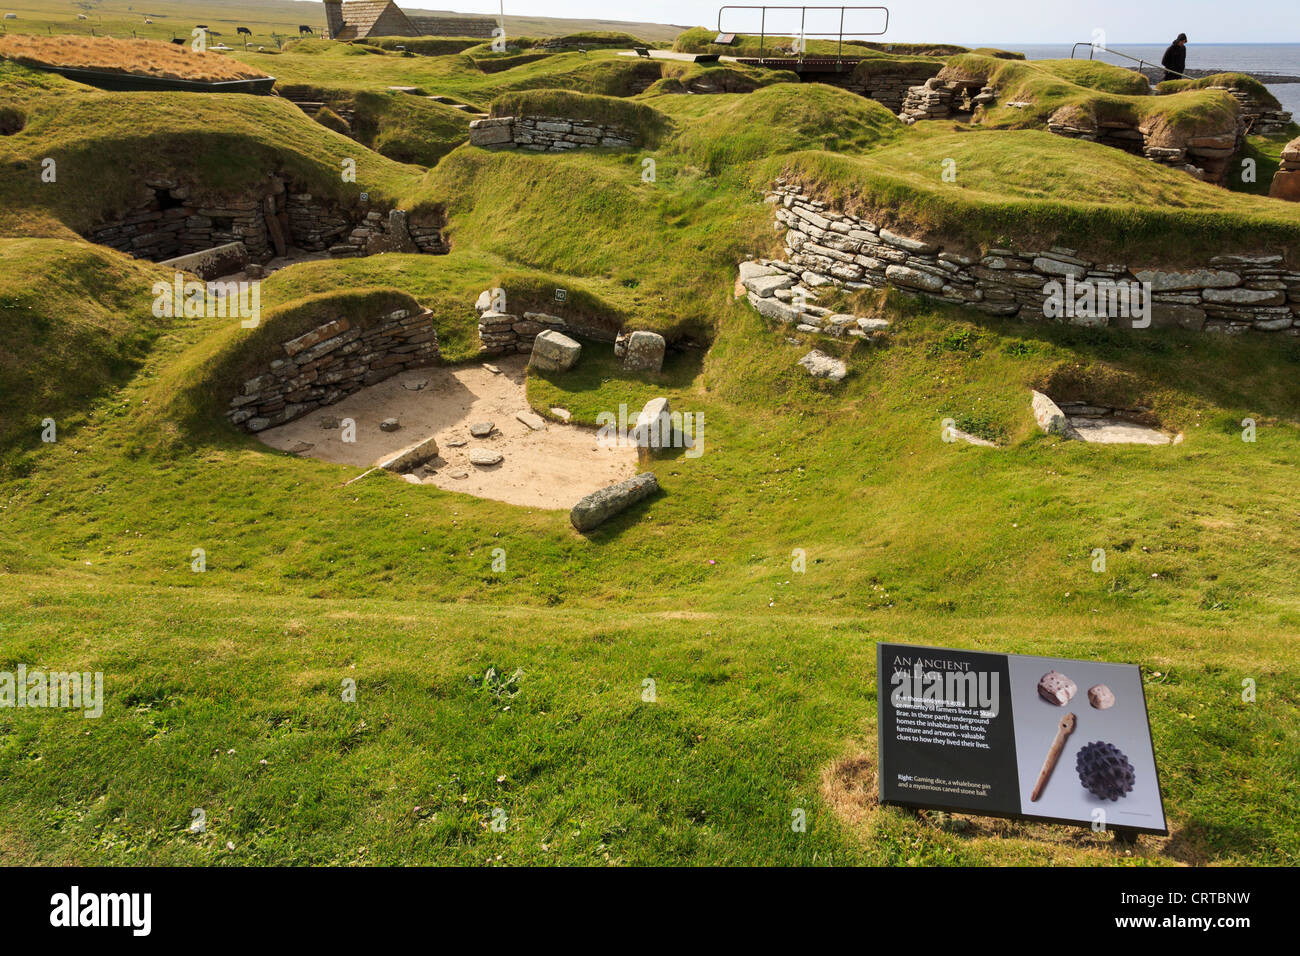 Excavations of ancient prehistoric houses in Neolithic village at Skara Brae with information sign. Orkney Islands Scotland UK Stock Photo